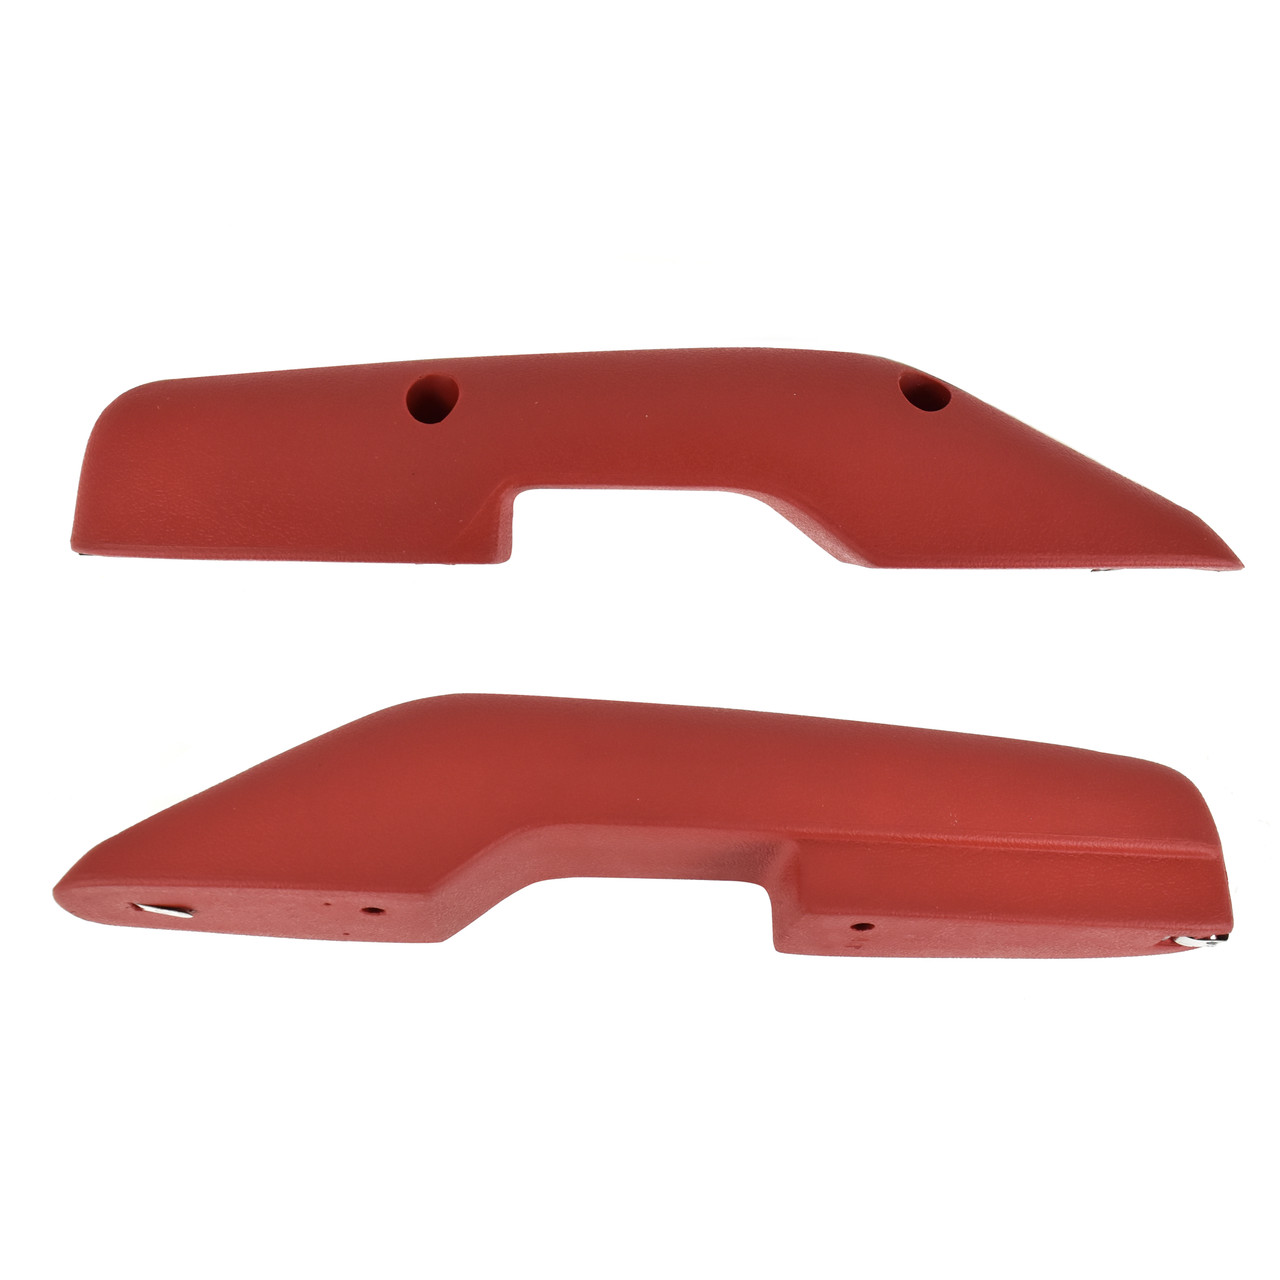 Arm Rest Pad Deluxe Red With Stainless Steel Trim Pair [FC-BA002A]